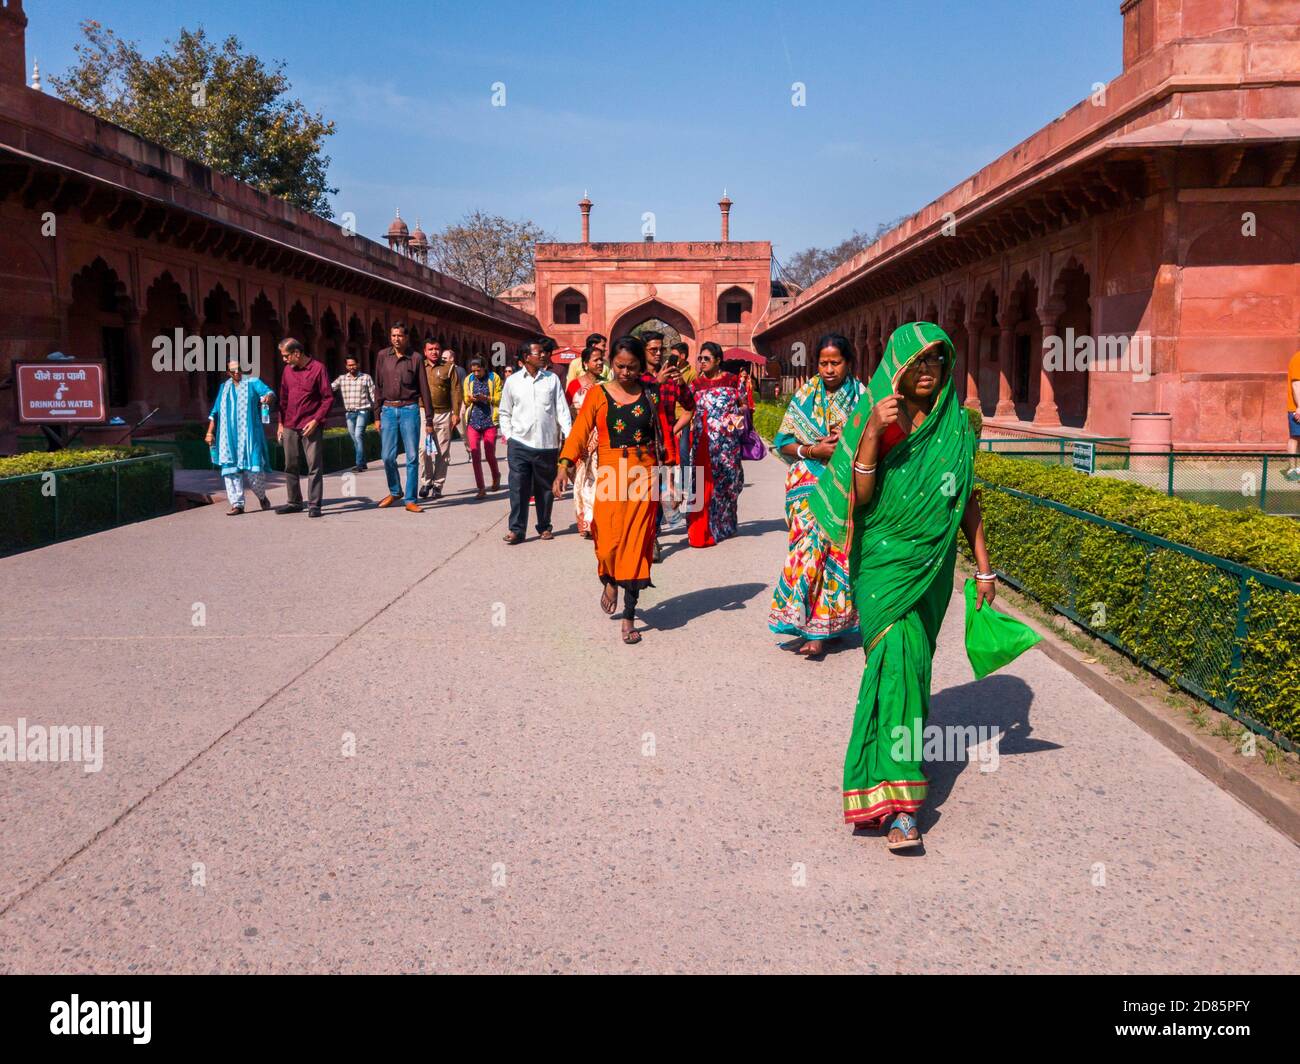 Agra, Uttar Pradesh, India - March 2019: A group of Indian tourists in colorful attire walking inside the red sandstone entrance to the Taj Mahal. Stock Photo